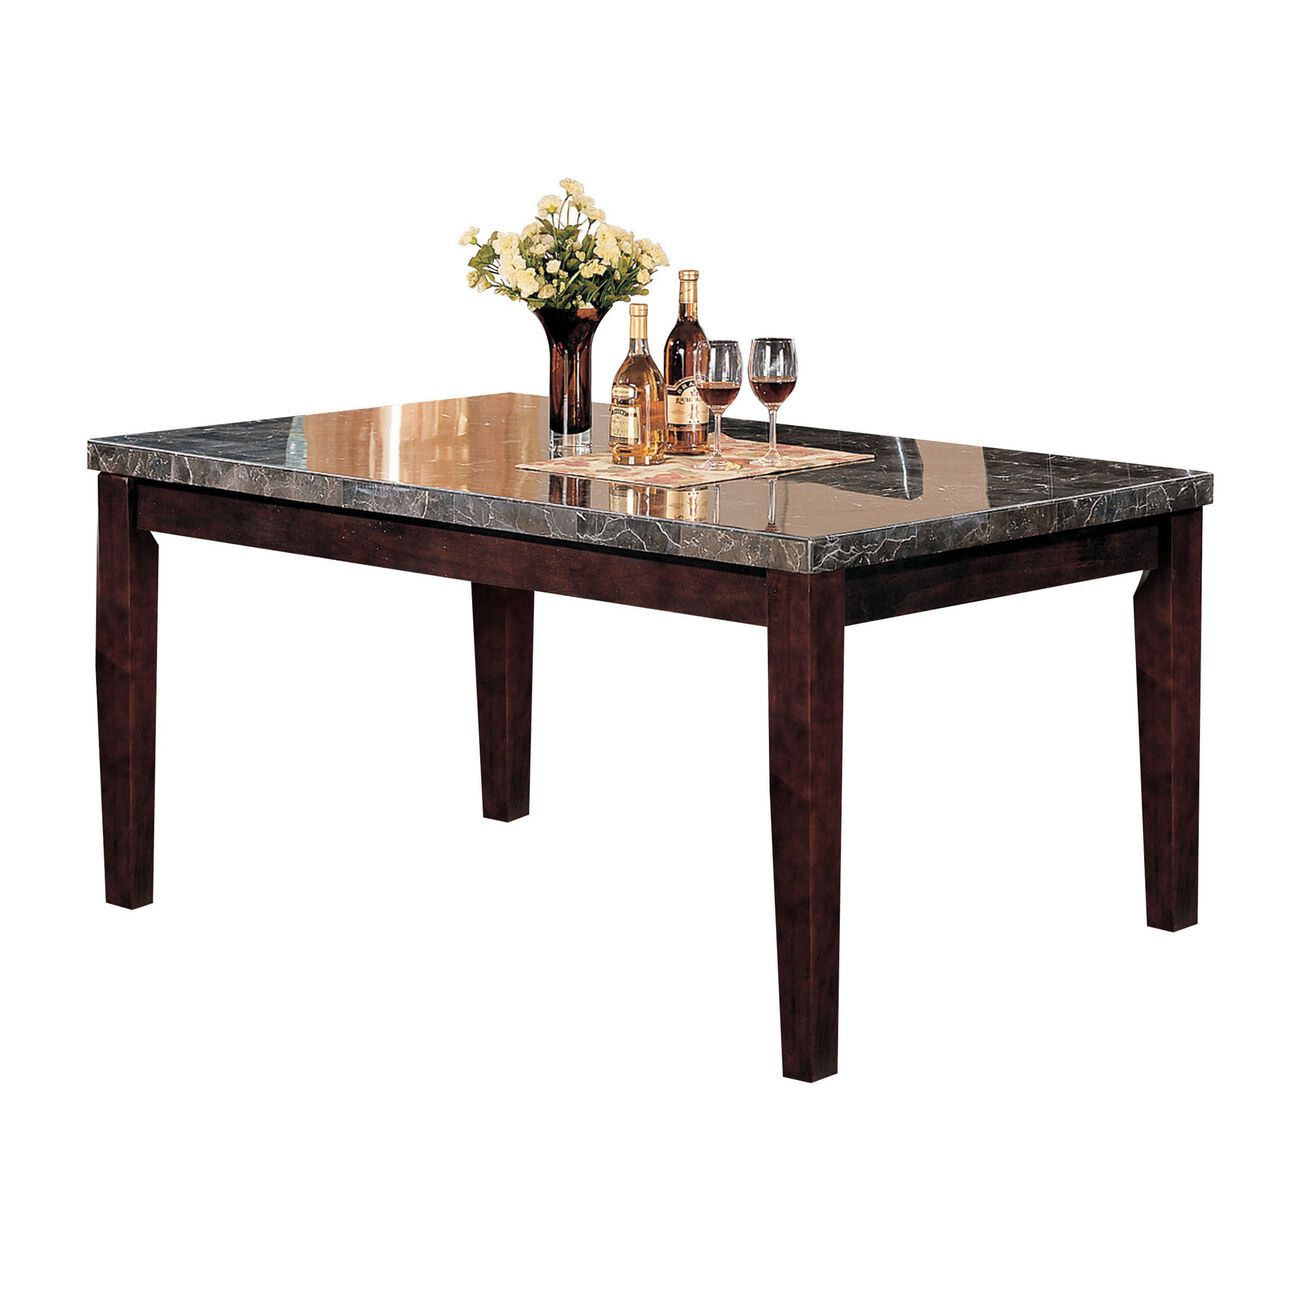 Wooden Dining Table With Marble Top, Dark Walnut Brown